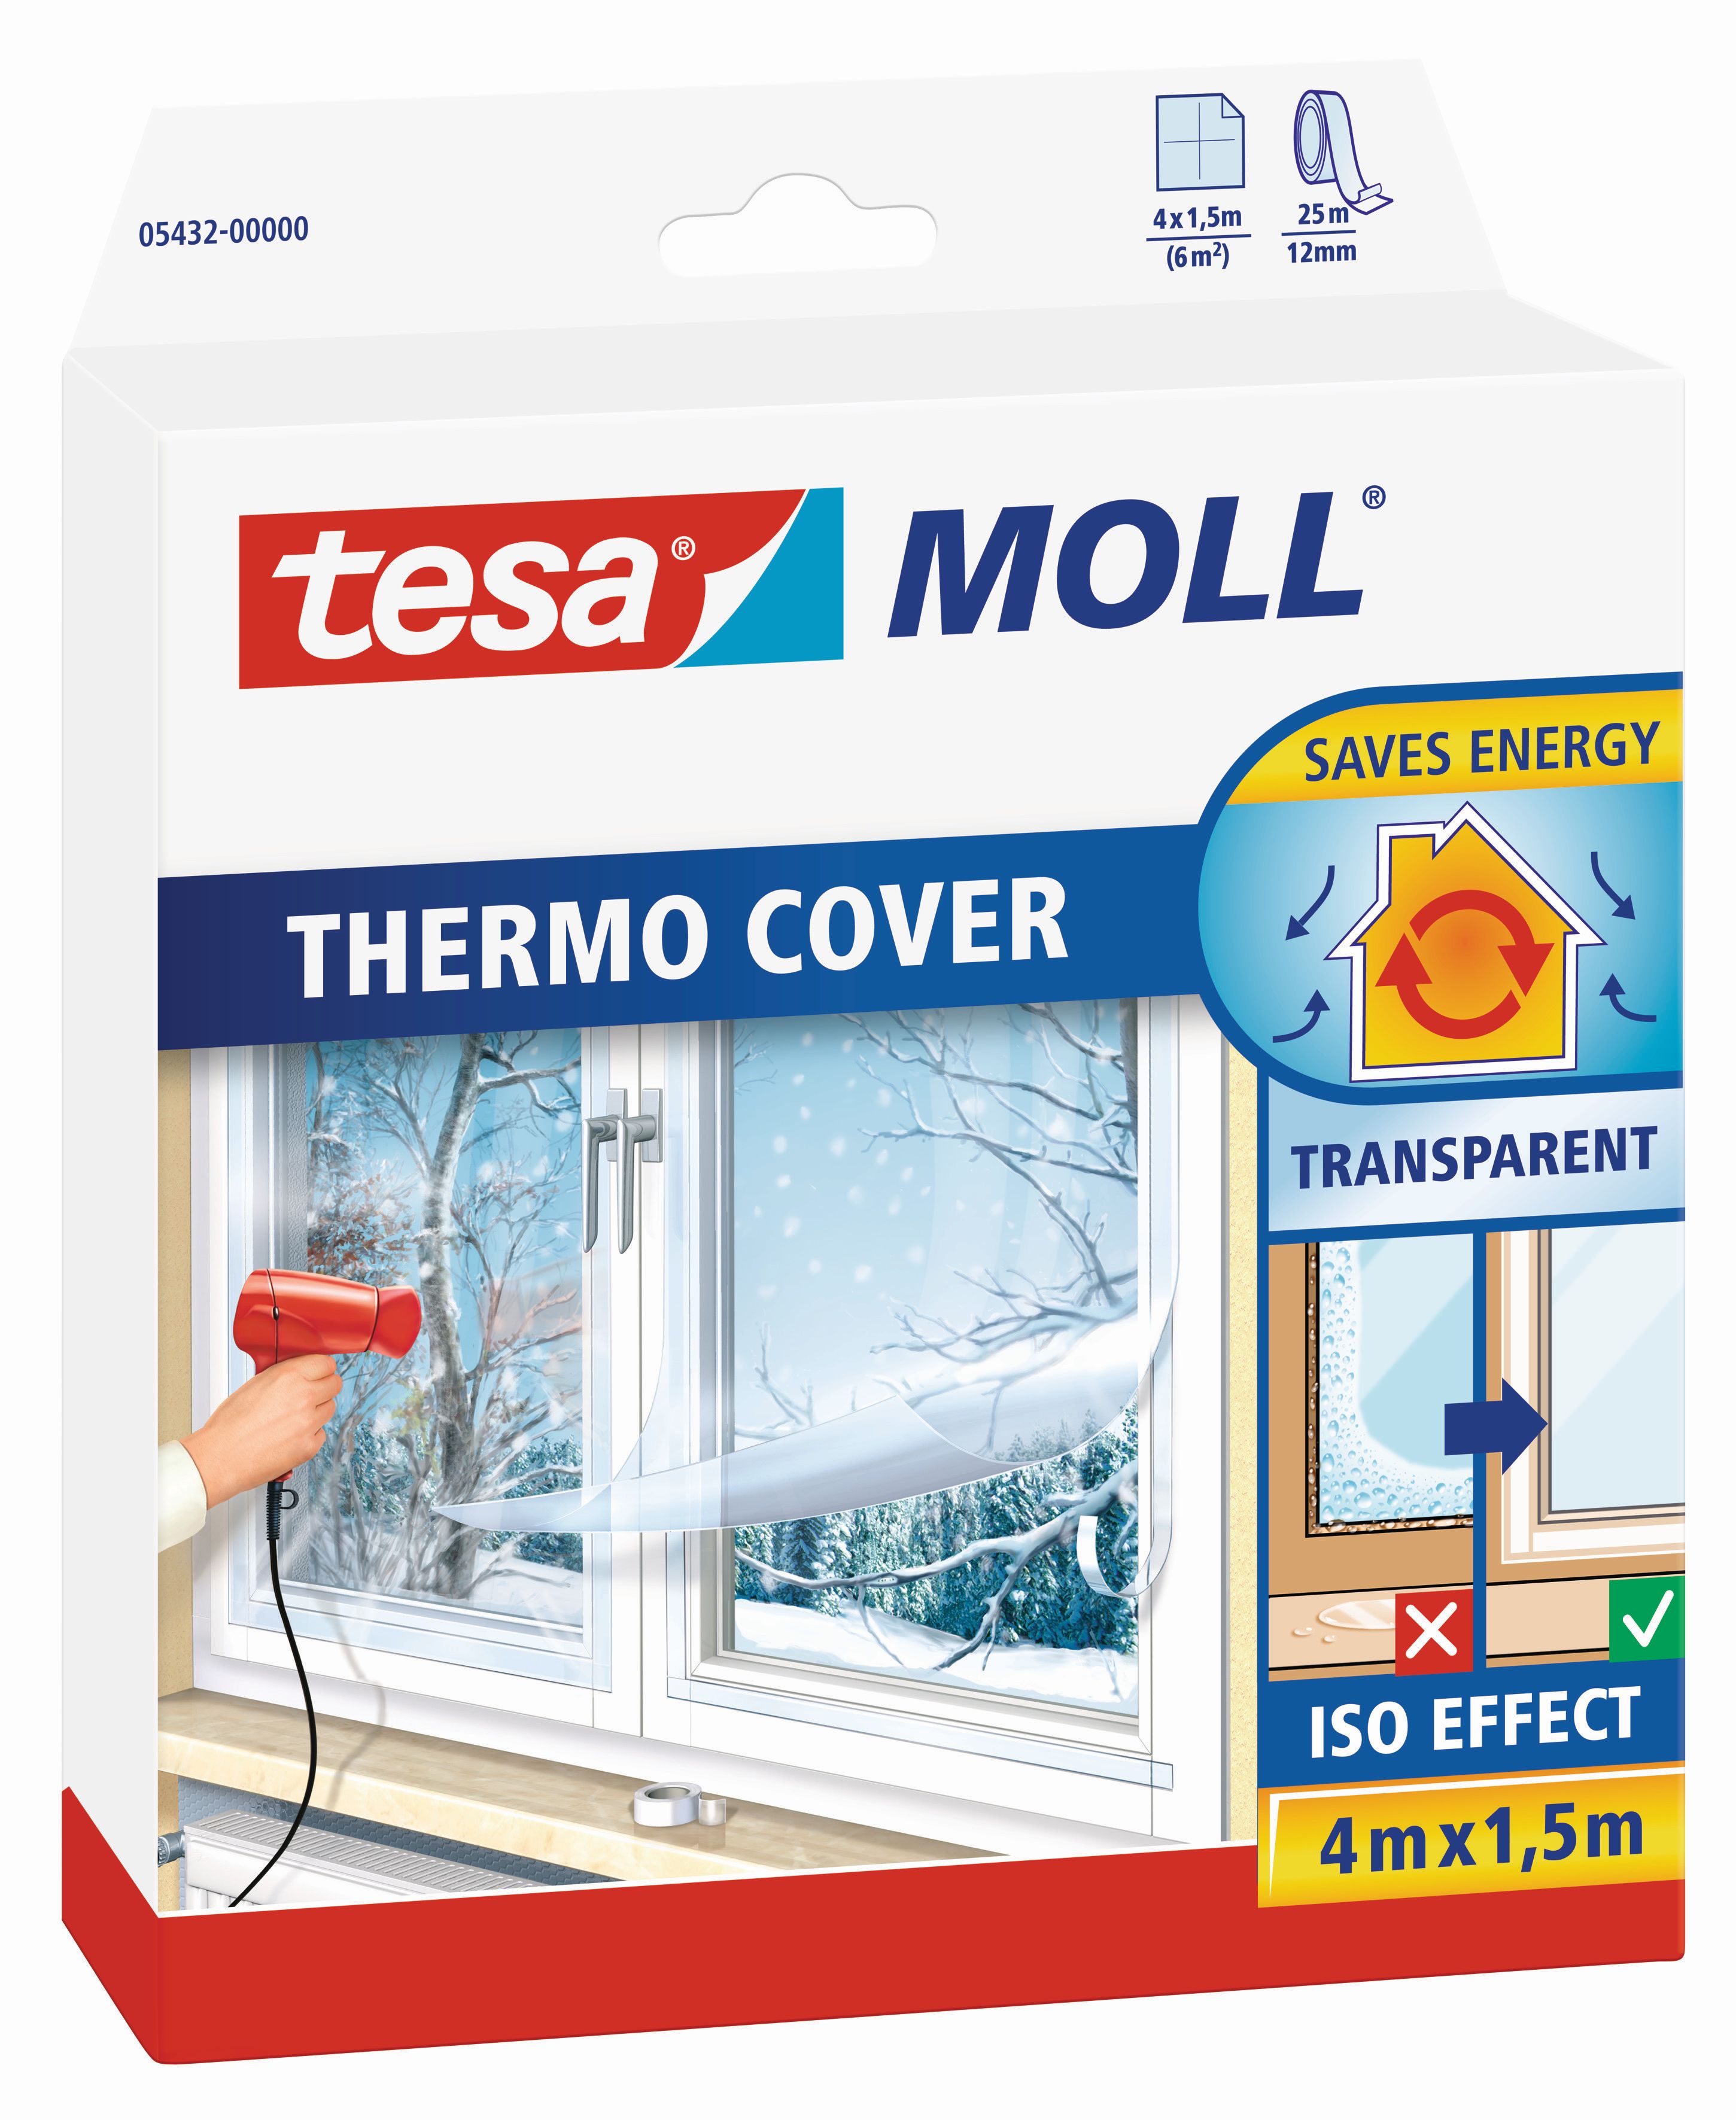 tesa® Thermo Cover Fenster-Isolierfolie